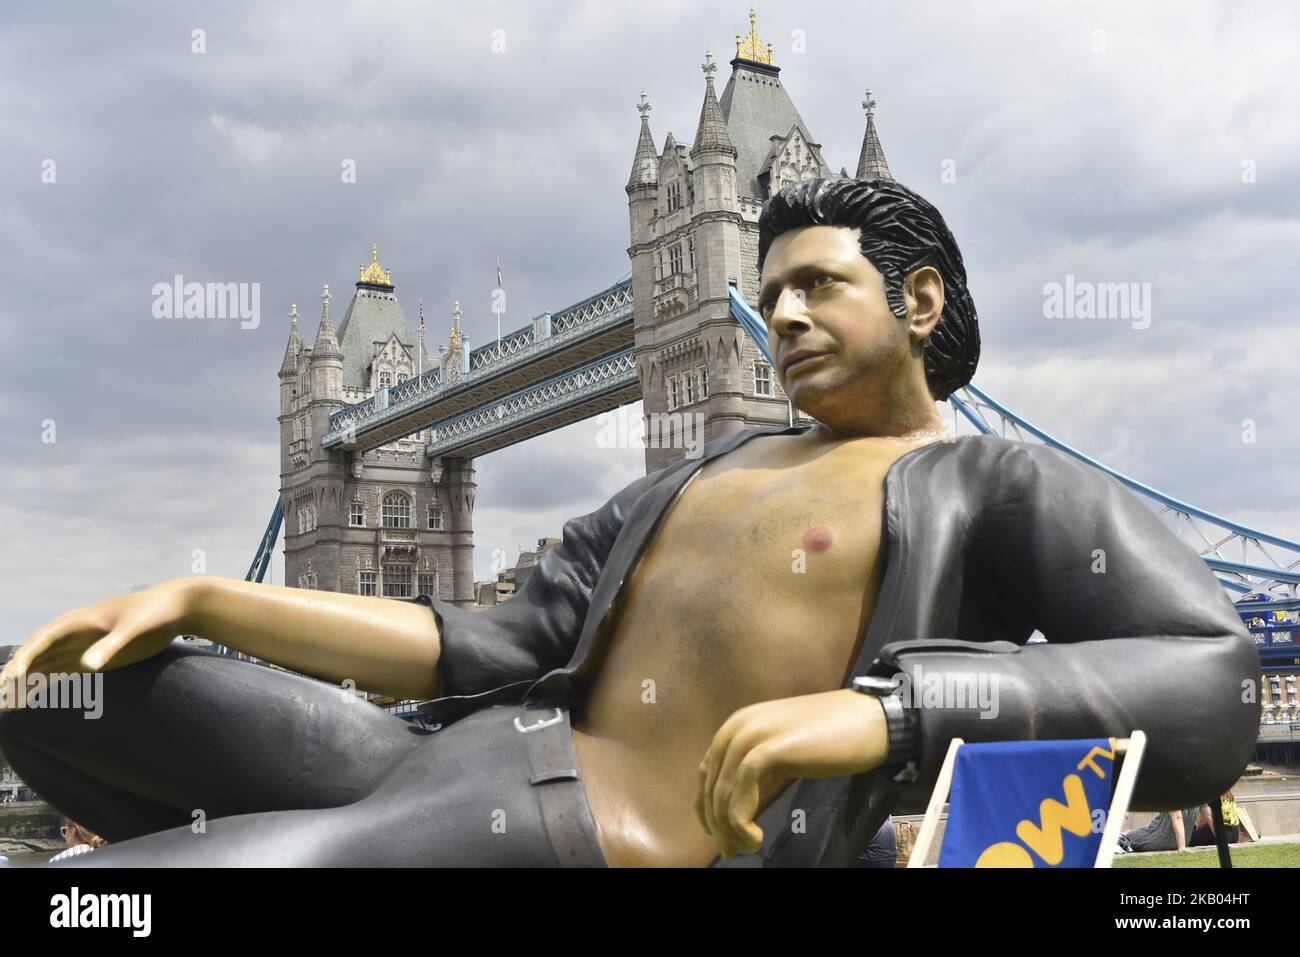 A giant statue of US actor Jeff Goldblum has been erected next to the Tower Bridge, London on July 18, 2018. The monument 7.6m (25ft) depicts the Jurassic Park star reclining, open-shirted, in a recreation of his famous pose from the 1993 dinosaur blockbuster. (Photo by Alberto Pezzali/NurPhoto) Stock Photo